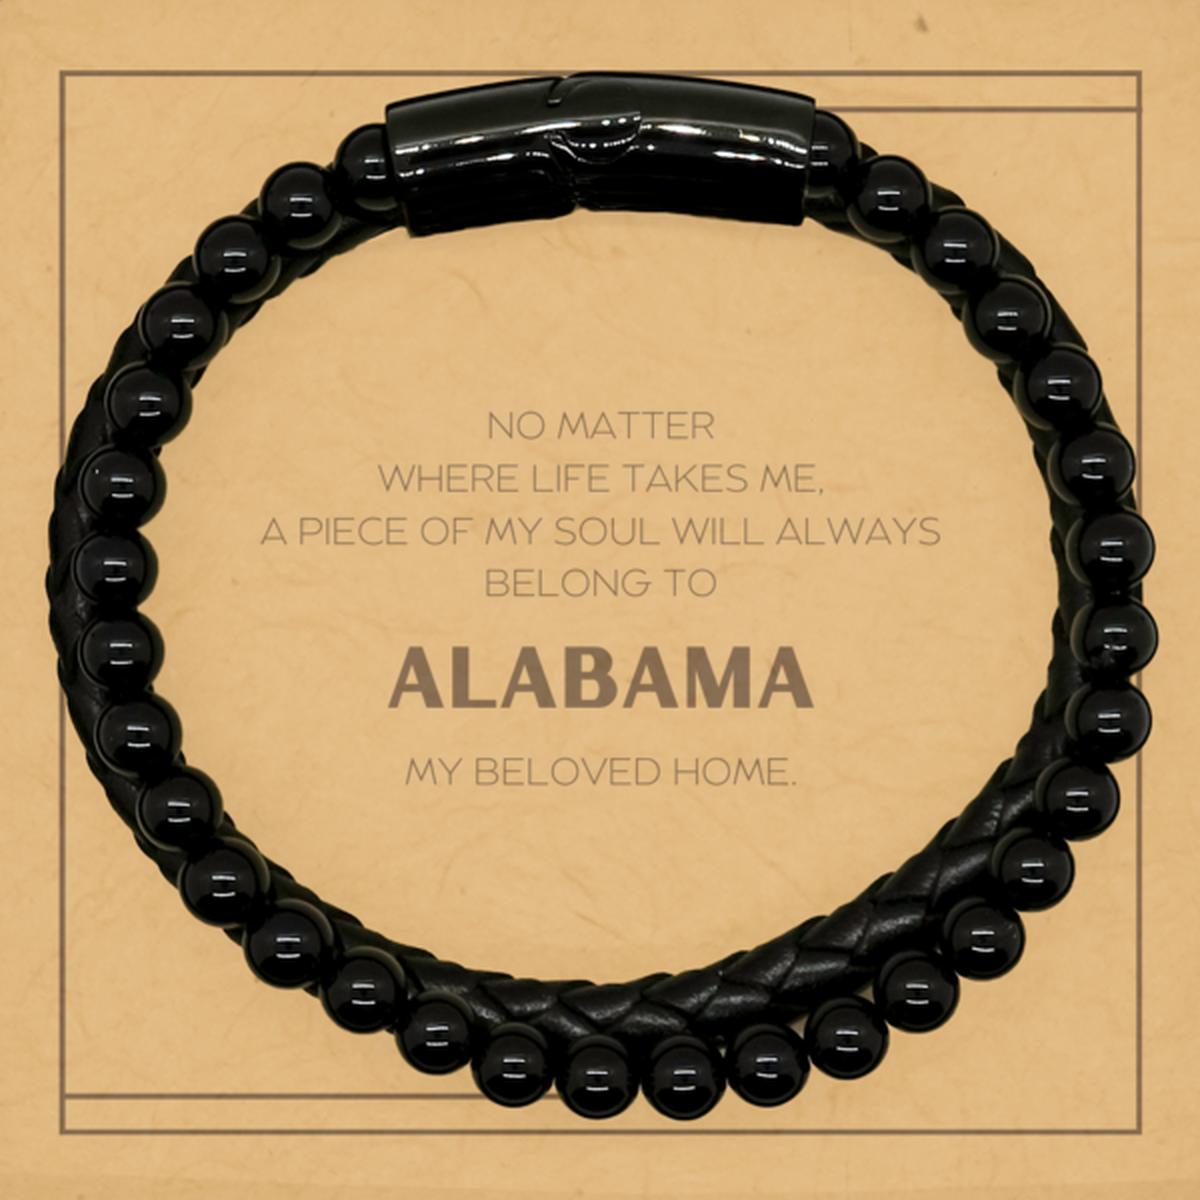 Love Alabama State Gifts, My soul will always belong to Alabama, Proud Stone Leather Bracelets, Birthday Unique Gifts For Alabama Men, Women, Friends